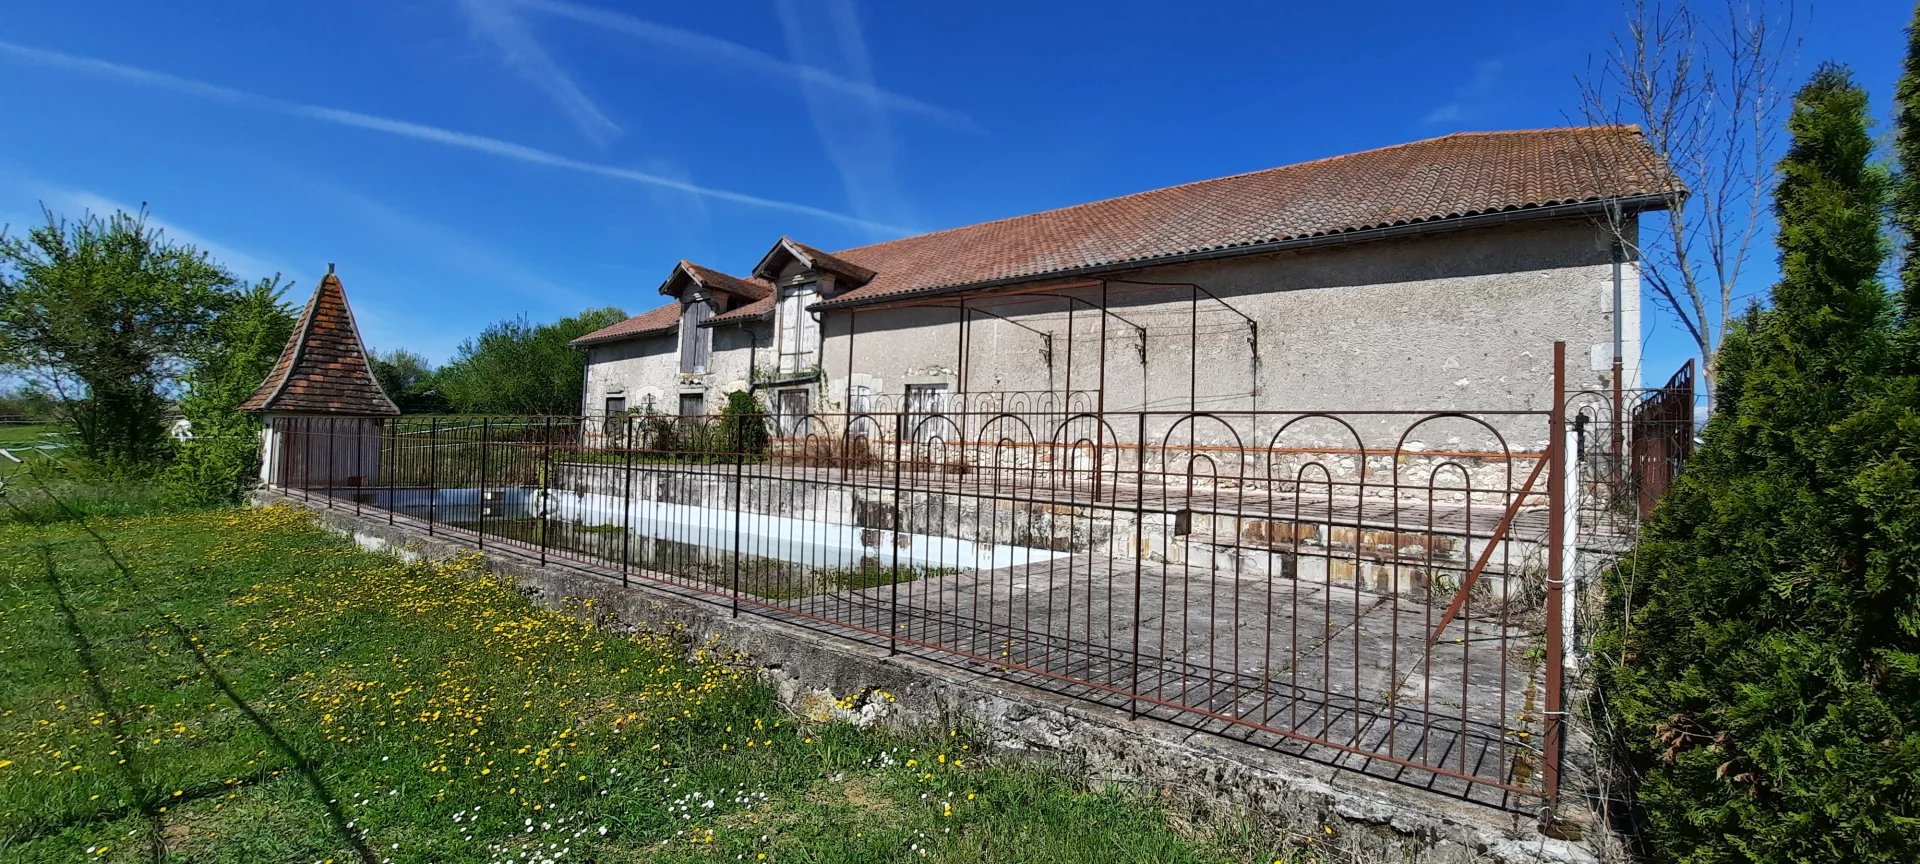 Lovely barn with planning permission in a peaceful setting